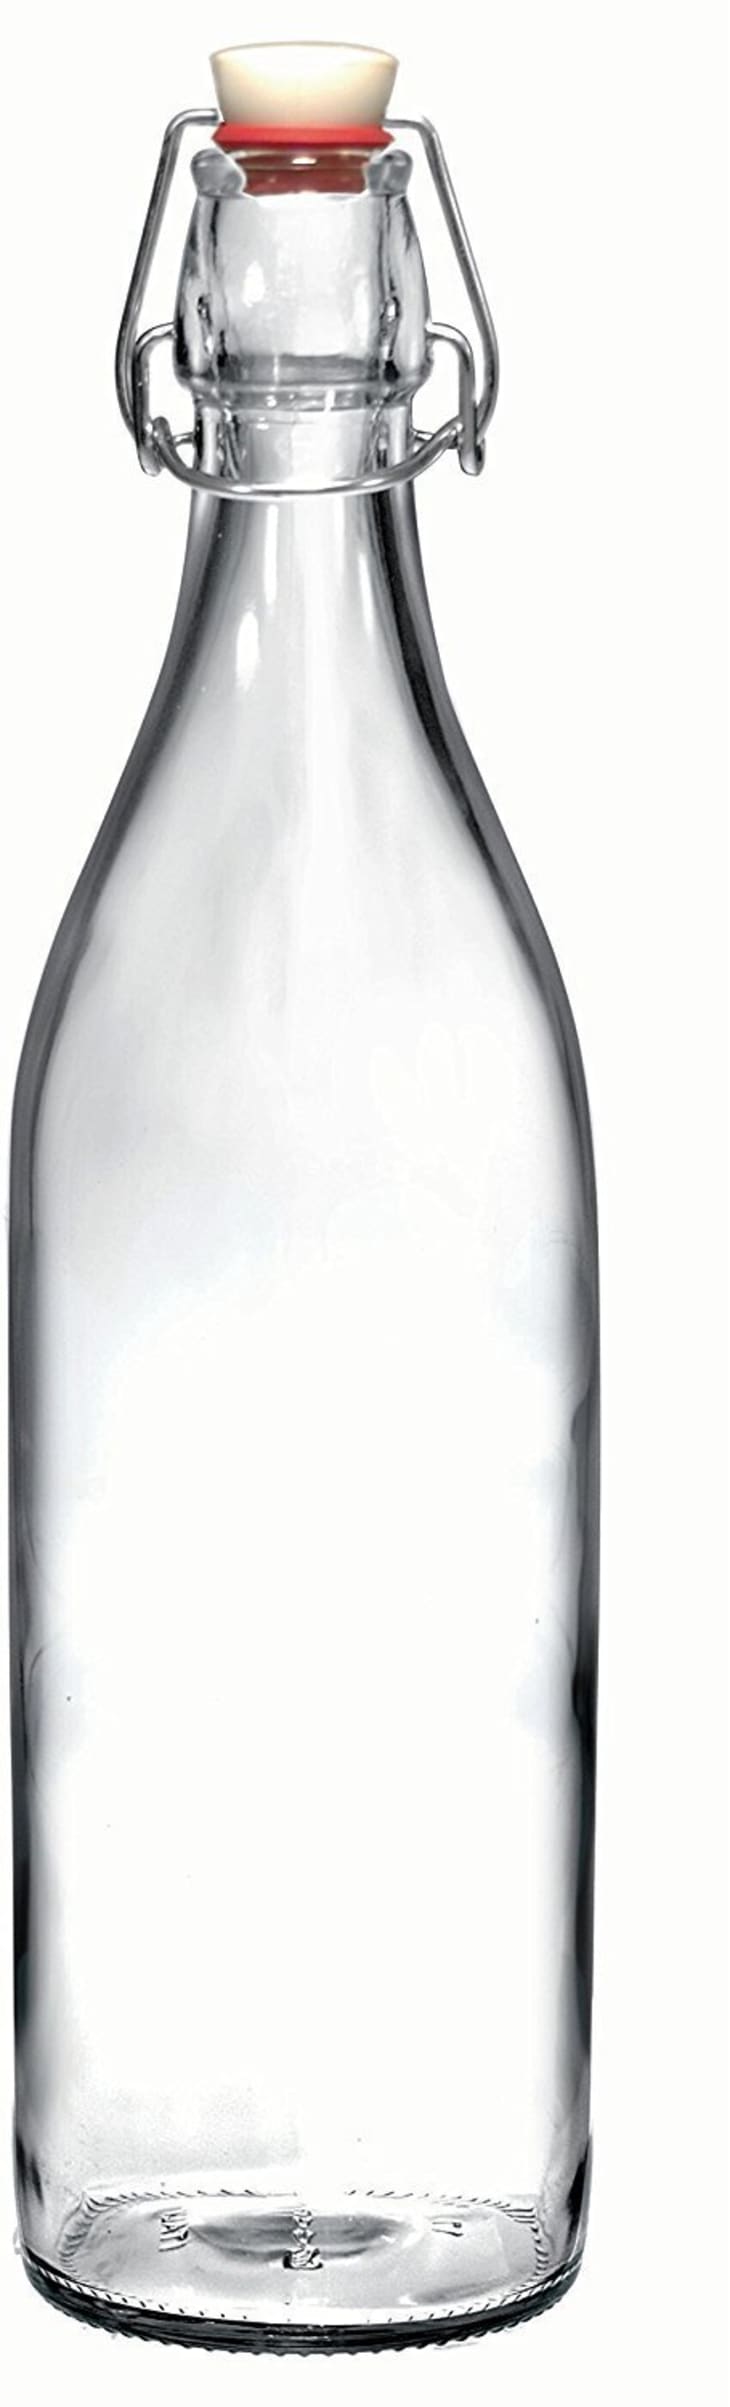 Product Image: Giara Glass Bottles with Stoppers, Pack of 4